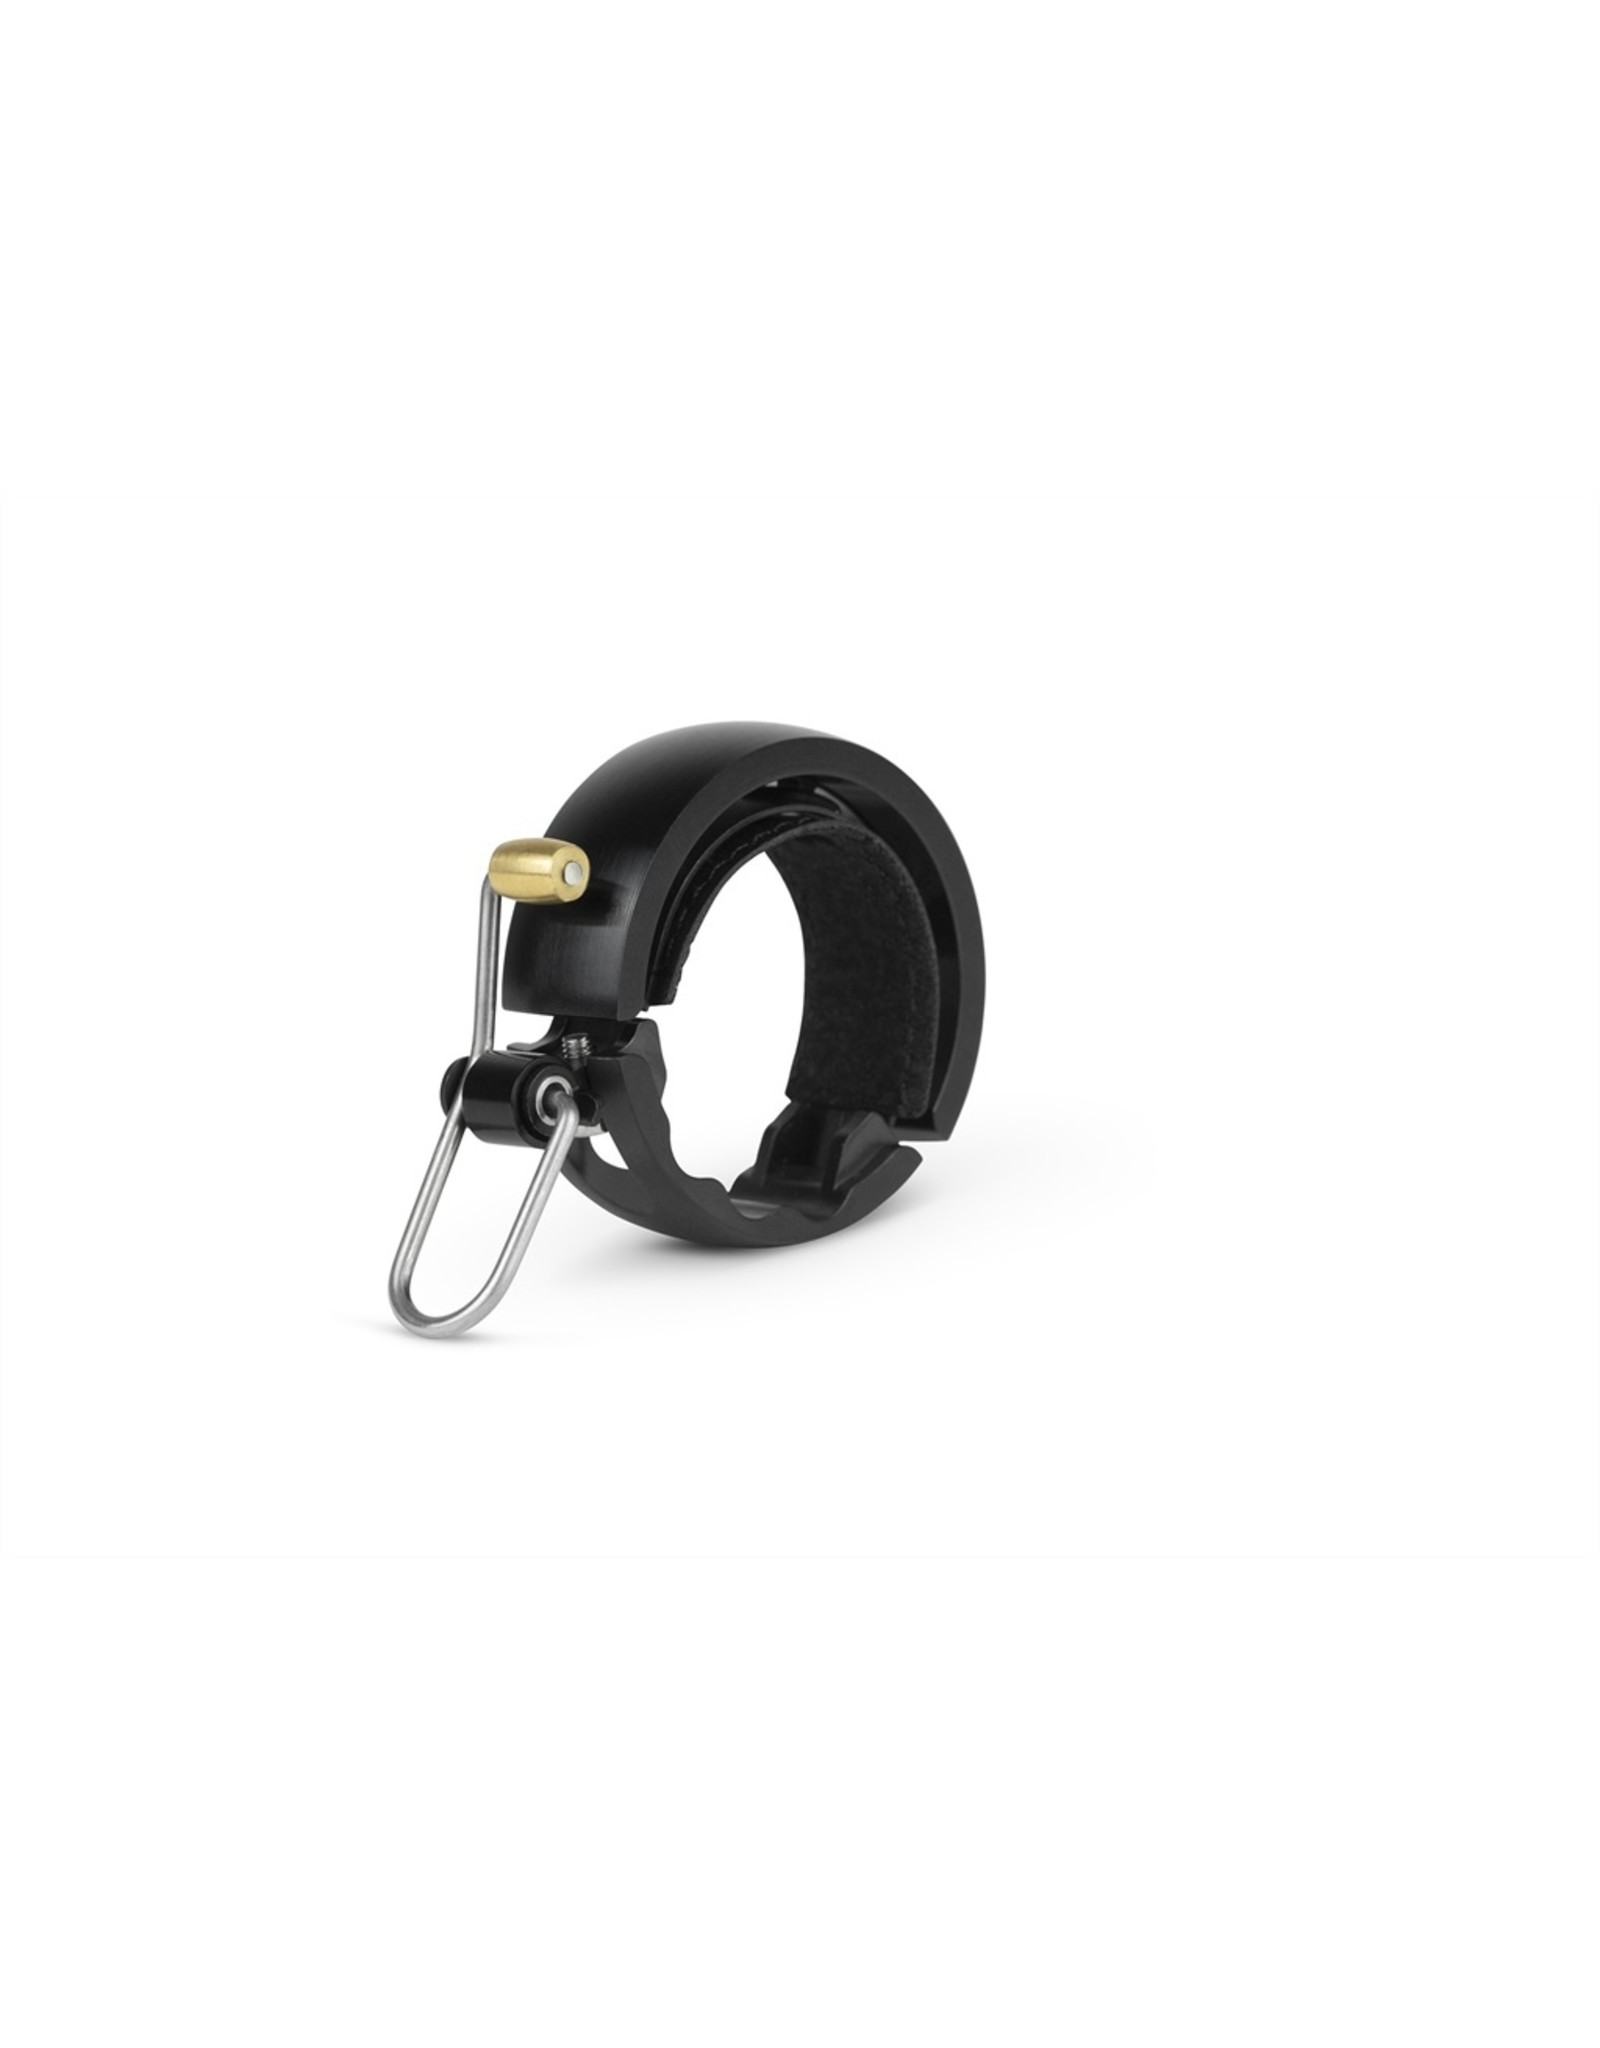 Knog Oi Bell Luxe